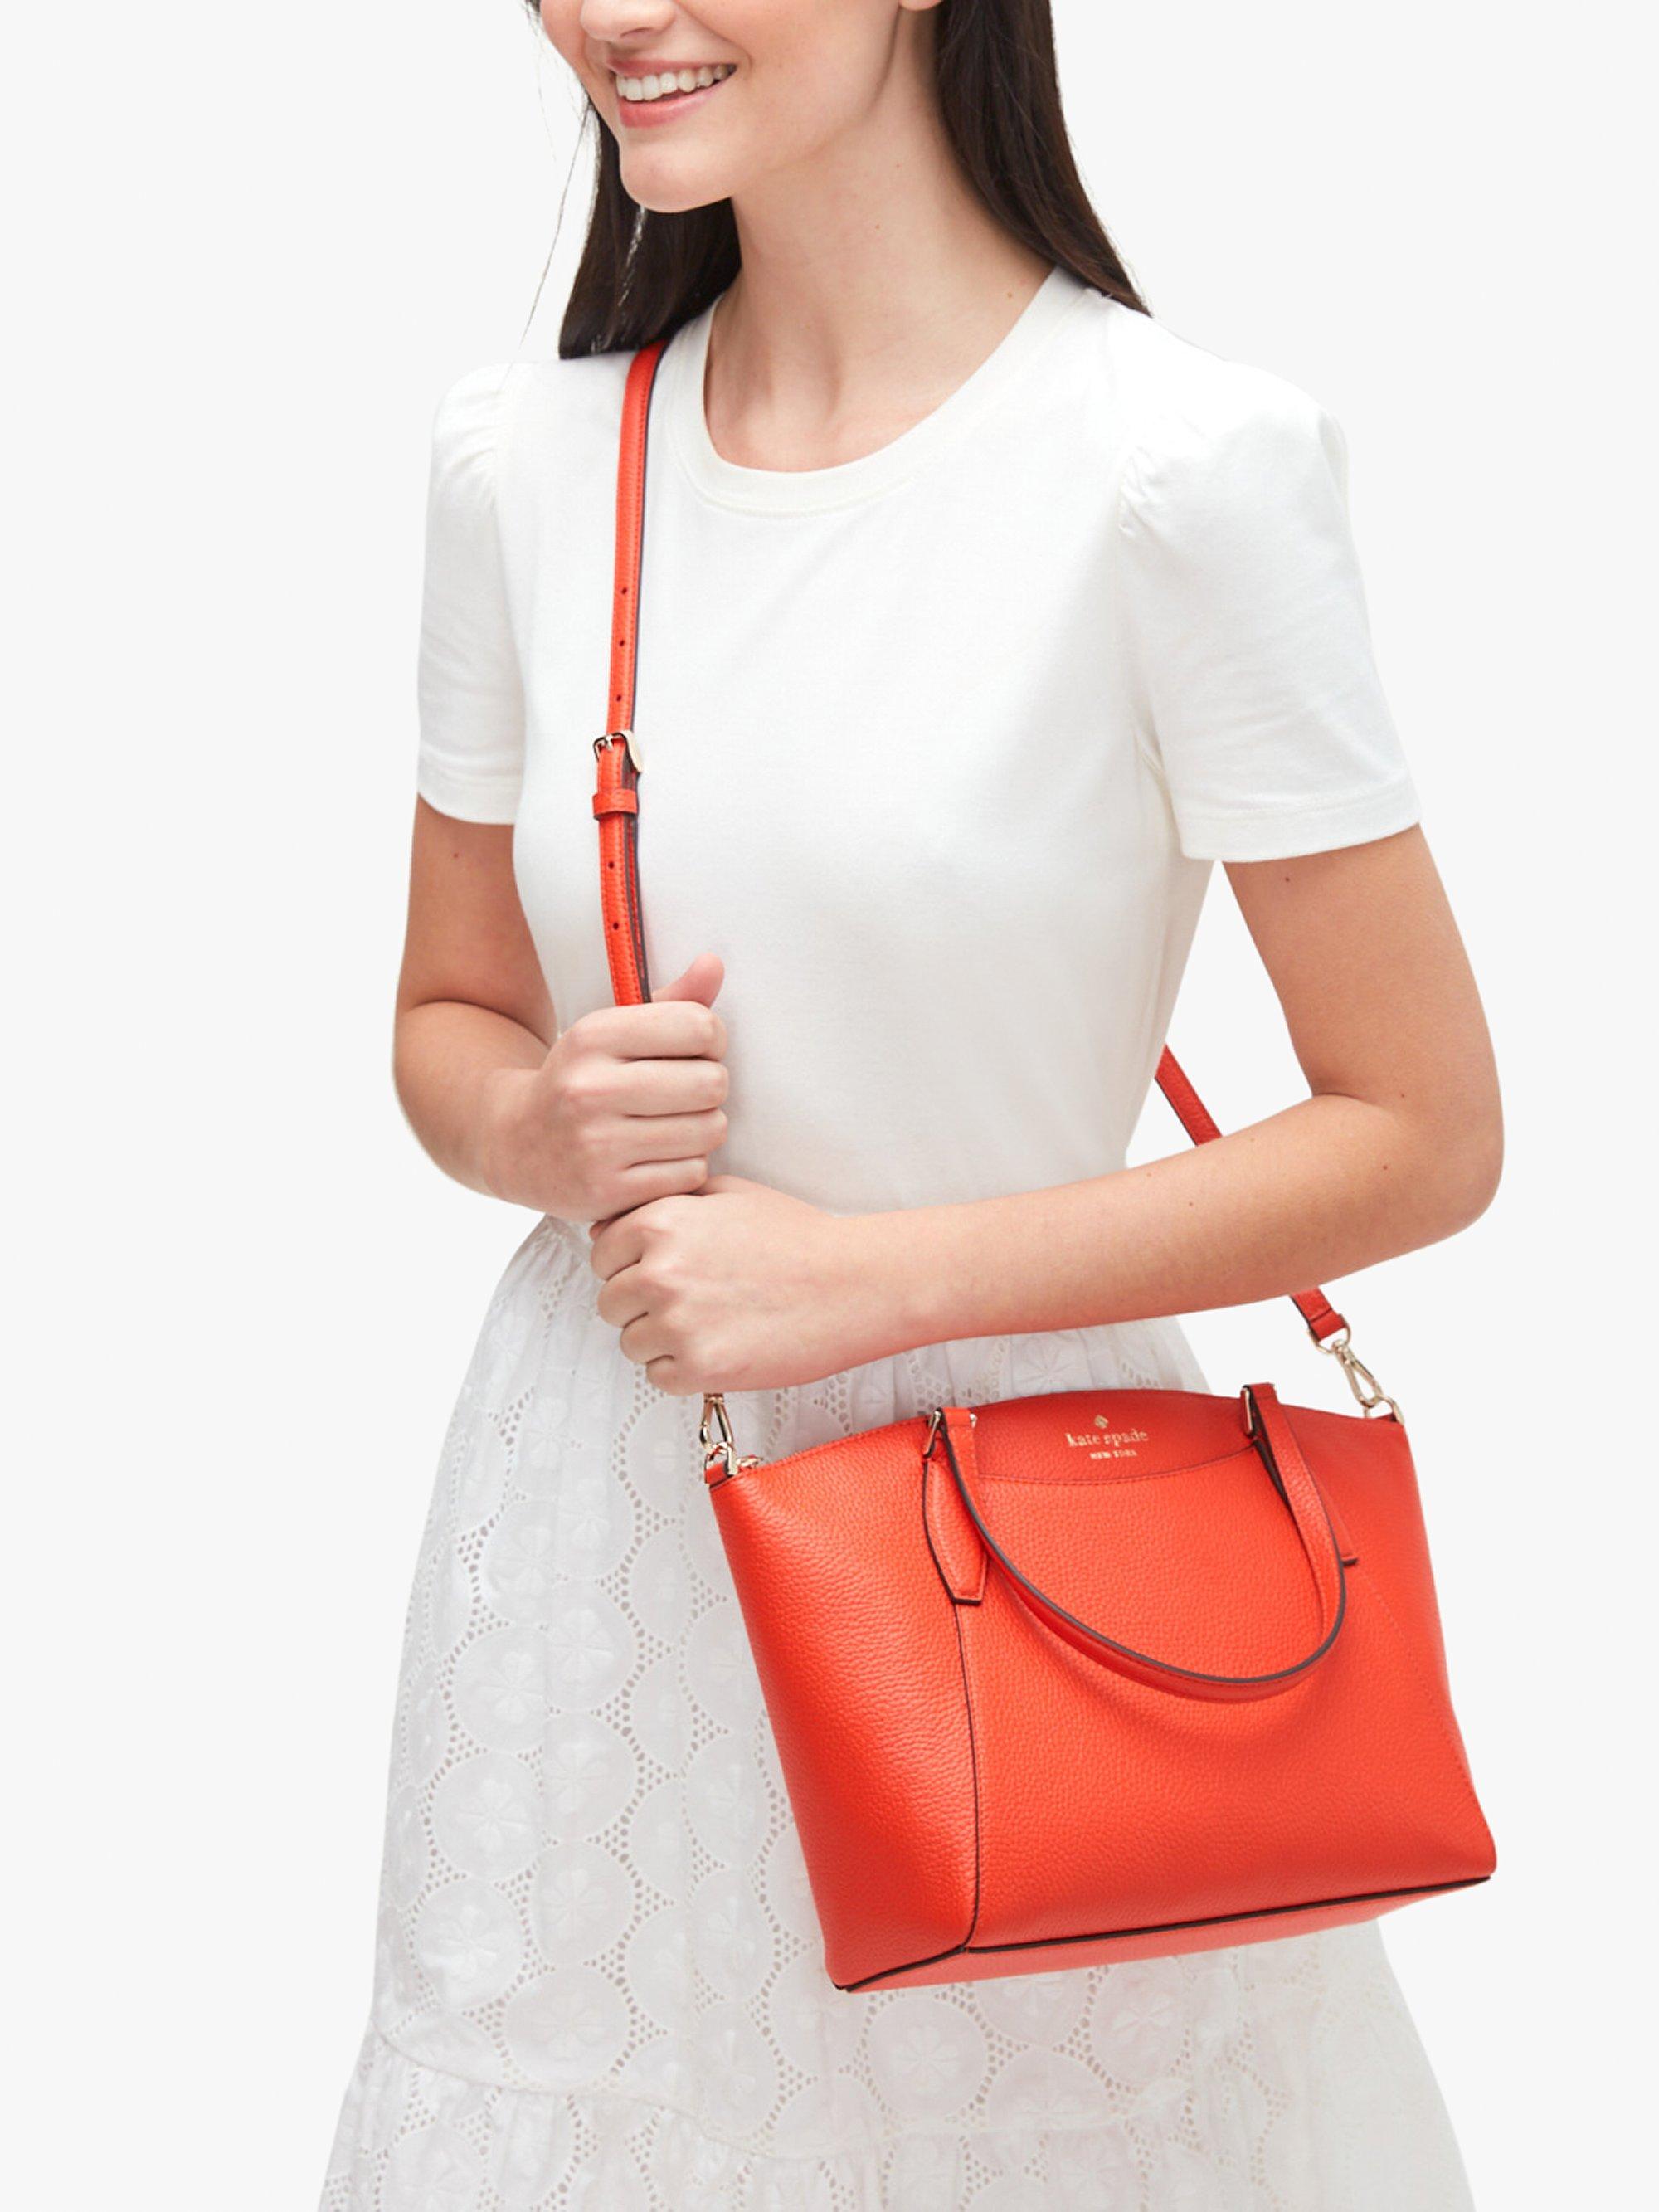 Kate Spade Leather Monica Satchel in Red - Lyst